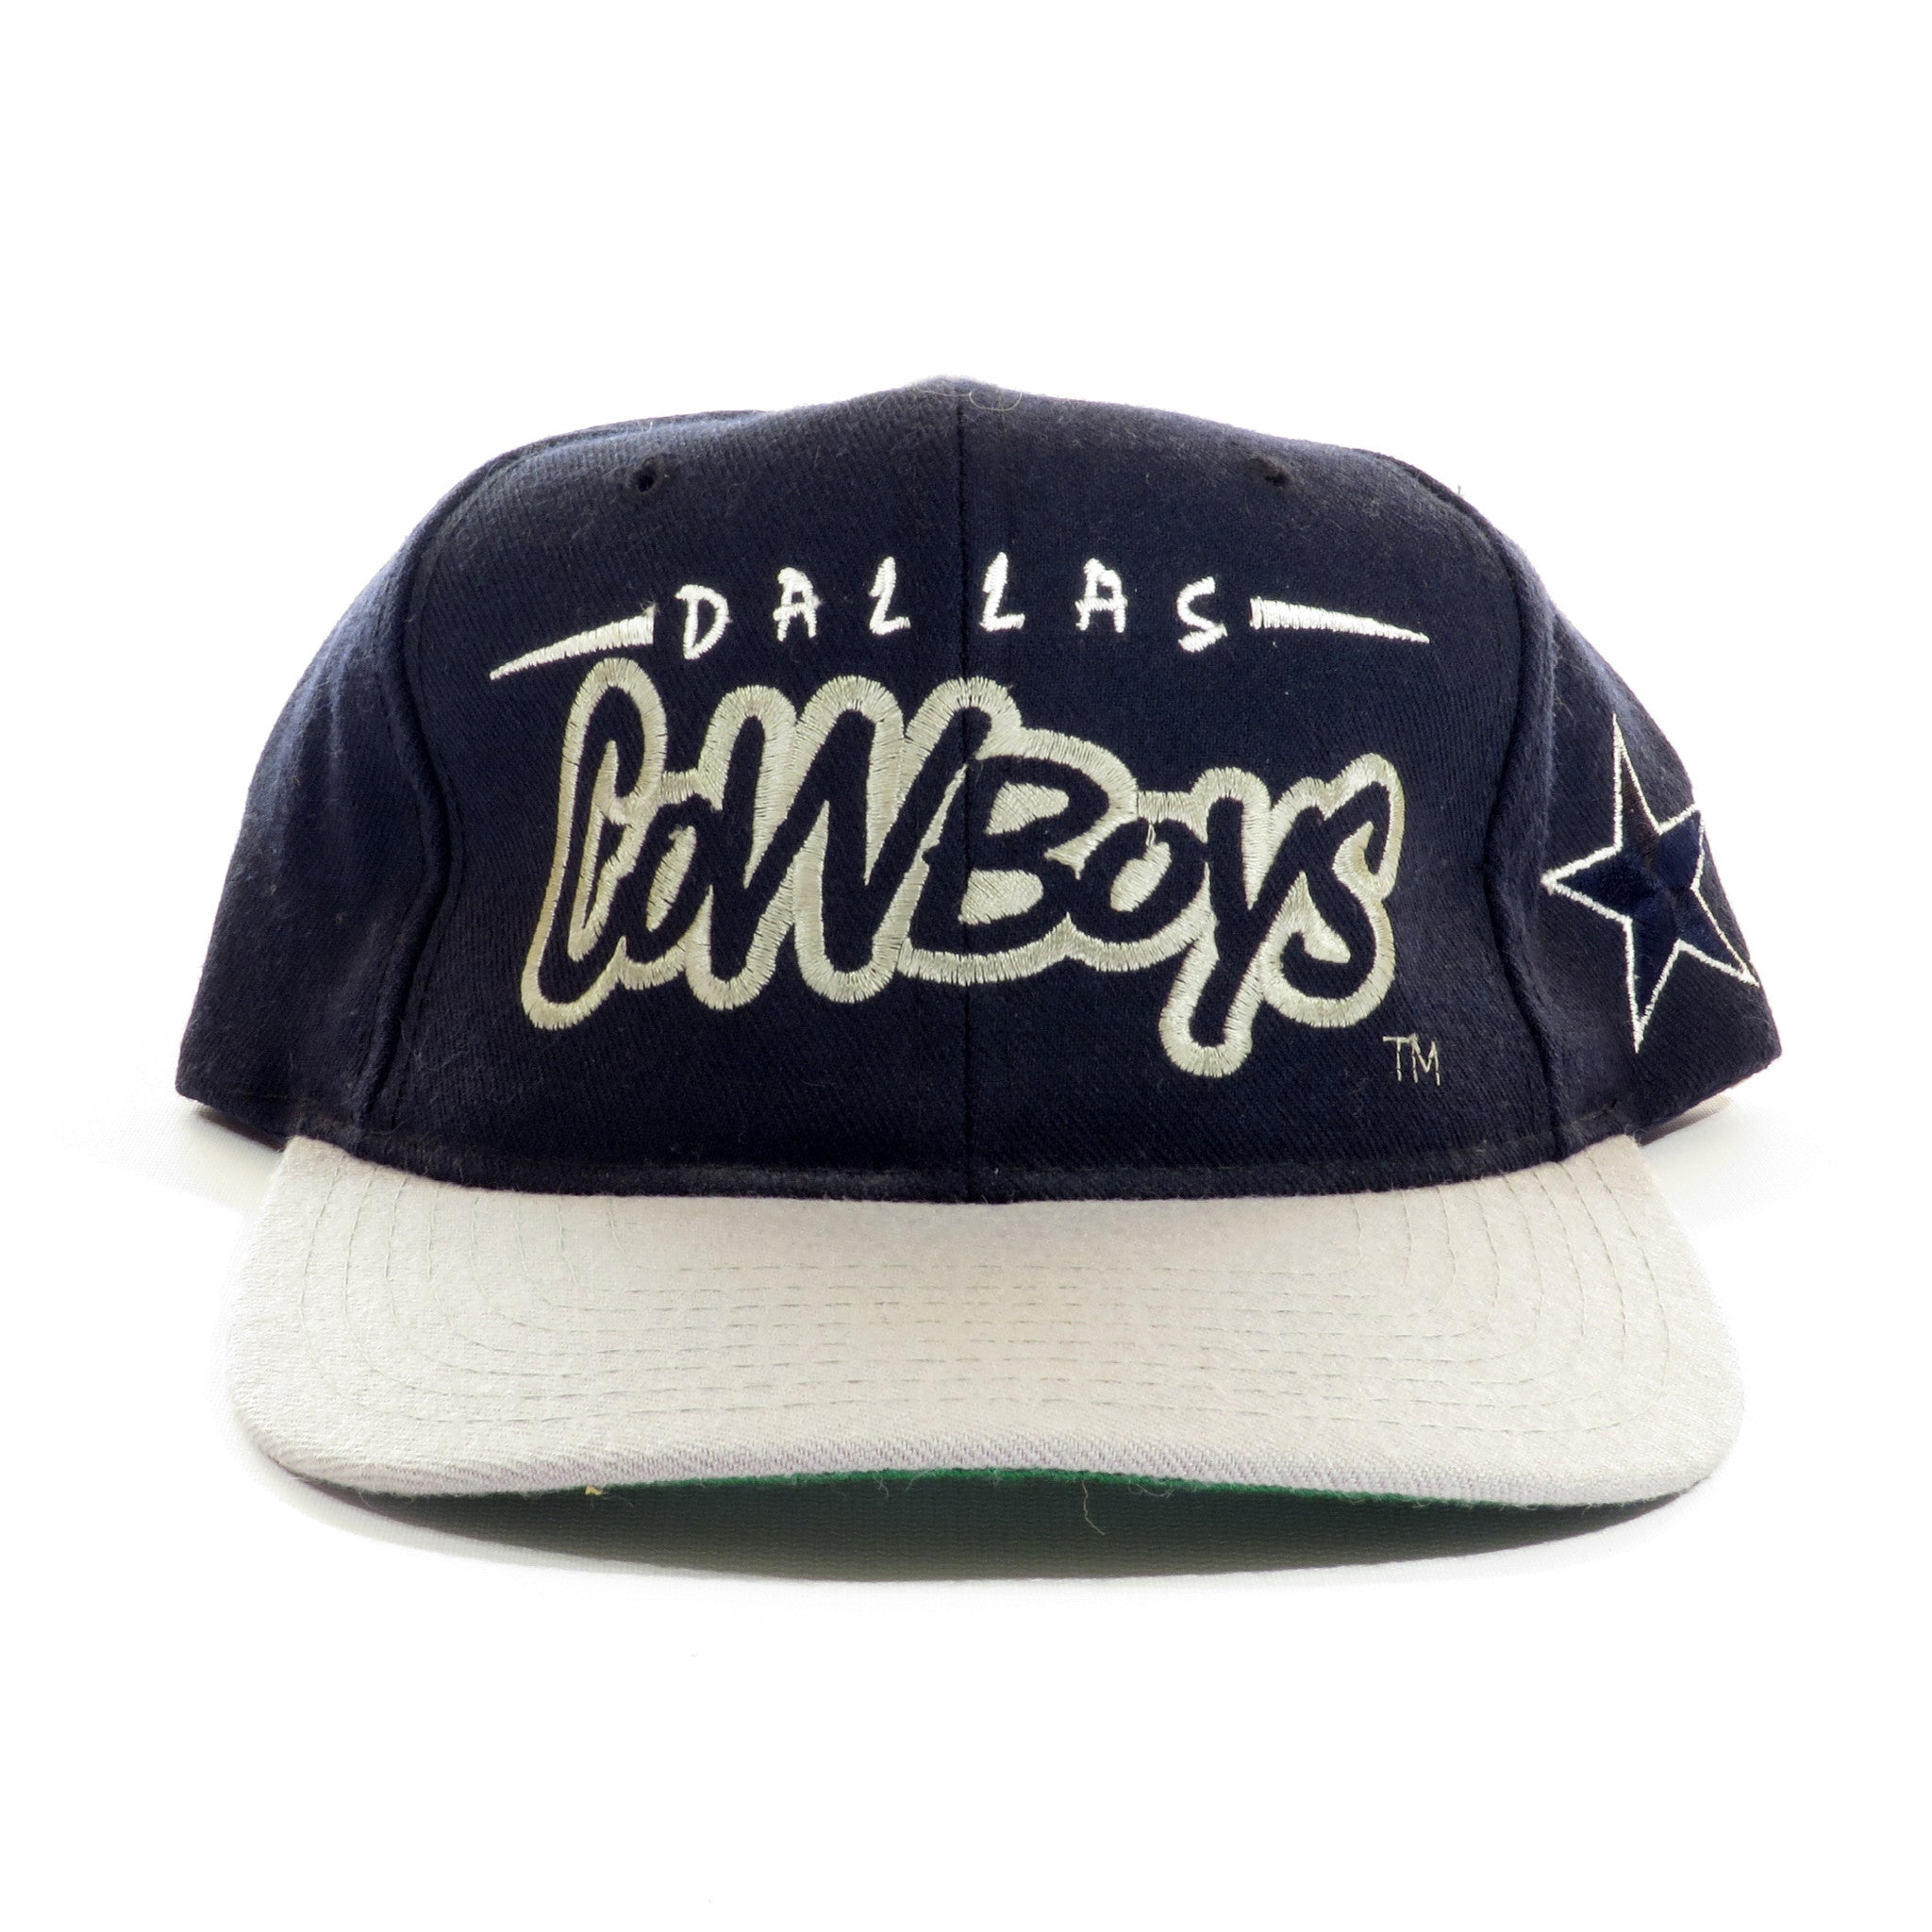 cowboys mitchell and ness beanie